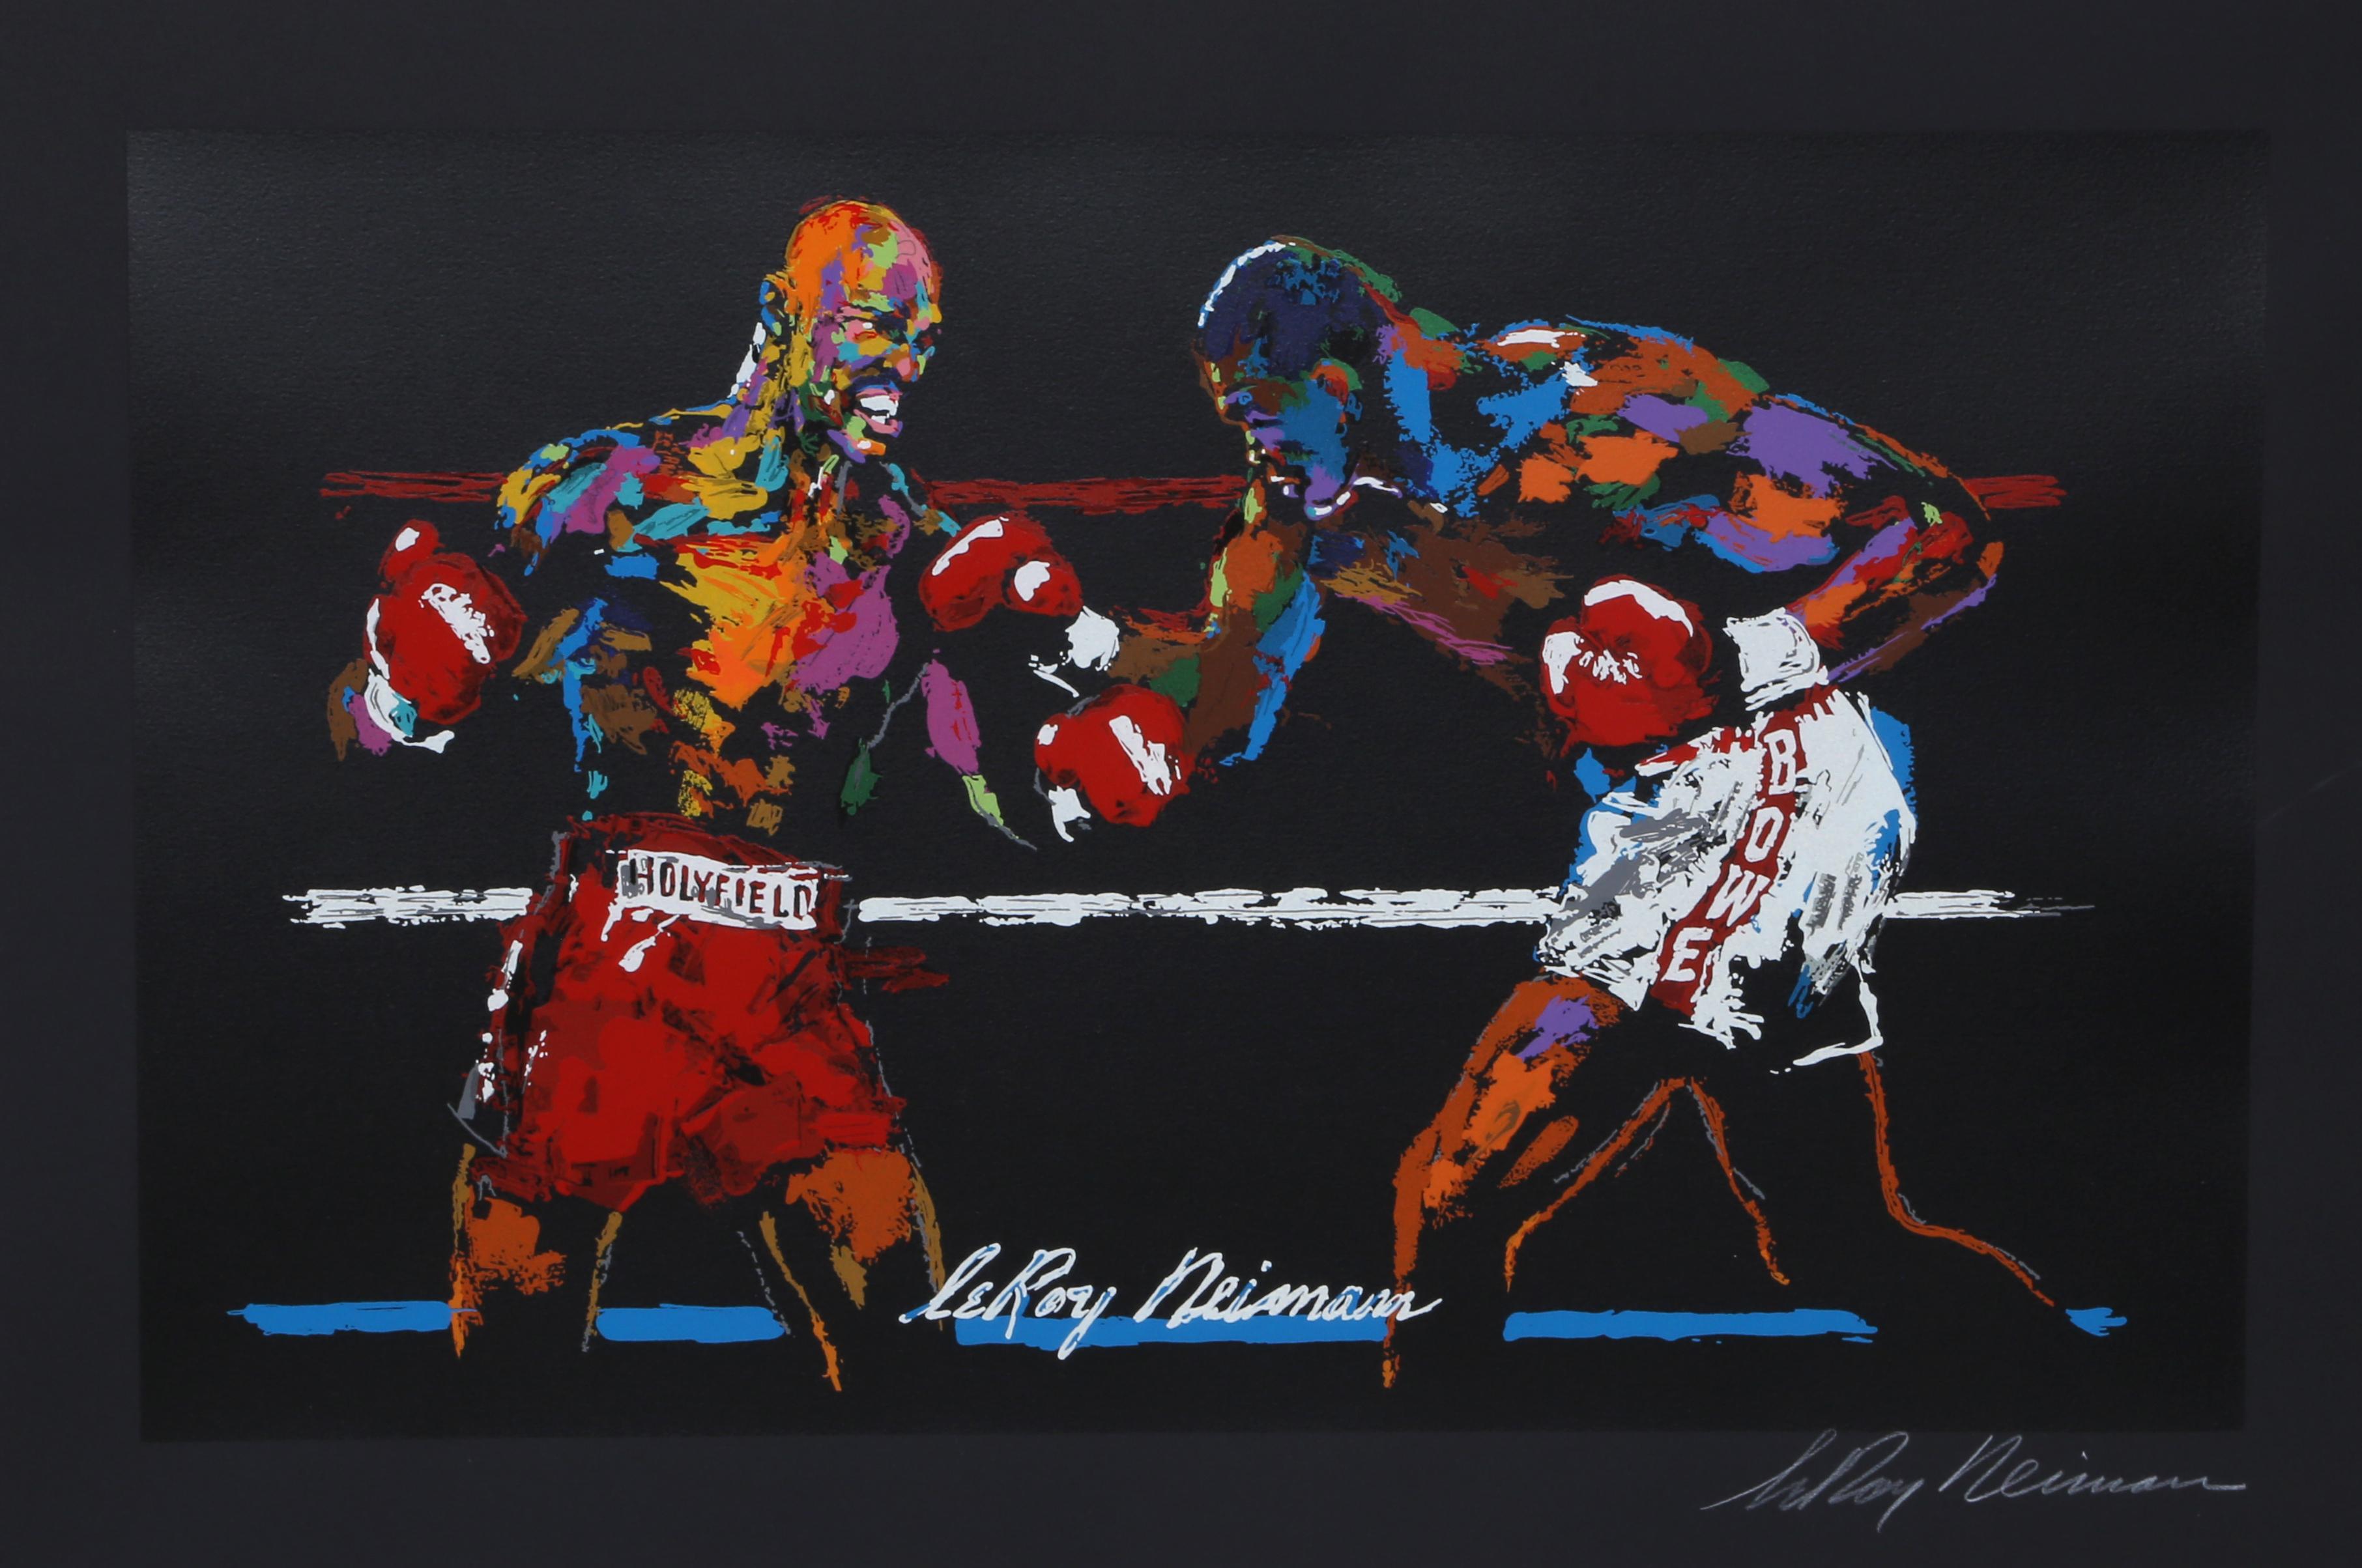 Artist: LeRoy Neiman (American, 1921-2012)
Title: Holyfield-Tyson 2
Year: circa 1997
Medium: Two Silkscreens, signed in pencil
Image Size: 12 x 22 inches (each)
Matted to:  26 x 62 inches